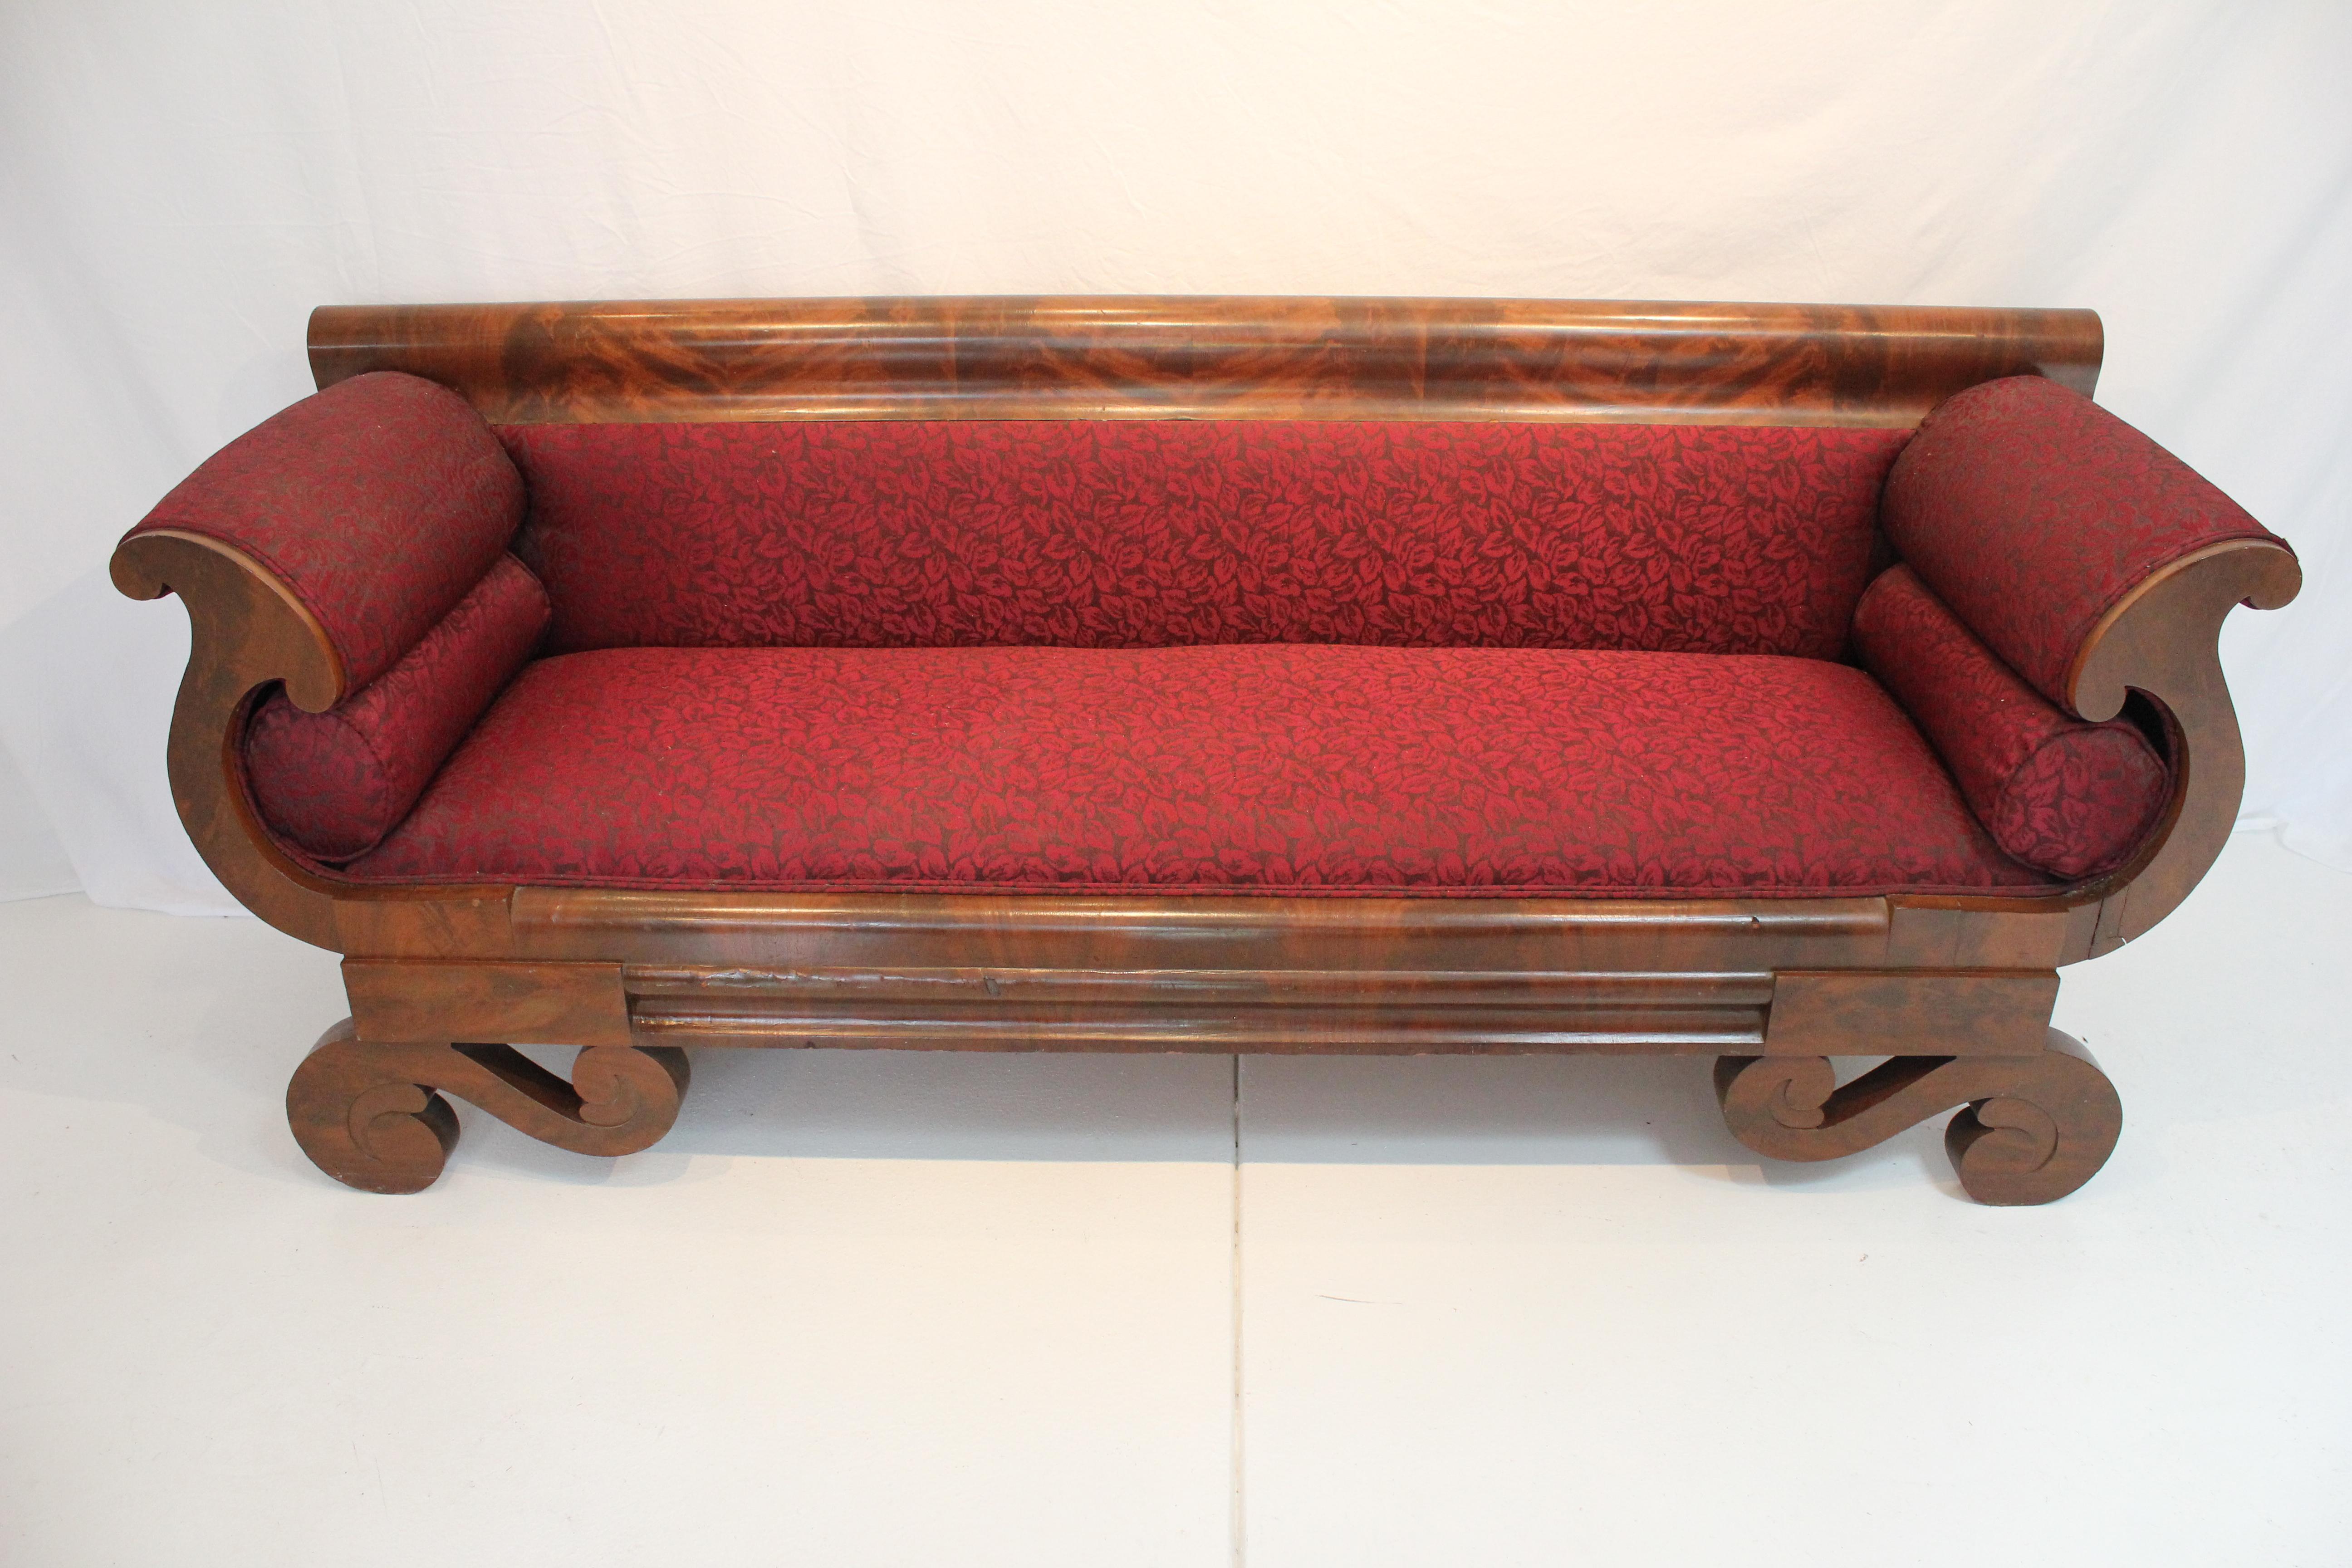 Period Antique American Empire Bench Sofa With Classical Empire Scrolled Arms and Feet. Flame Mahogany Wood Trim Over Solid Hardwood Construction and Hand Dovetailed Joinery. Eight way hand tied seat foundation.  A very solid, quality hand made